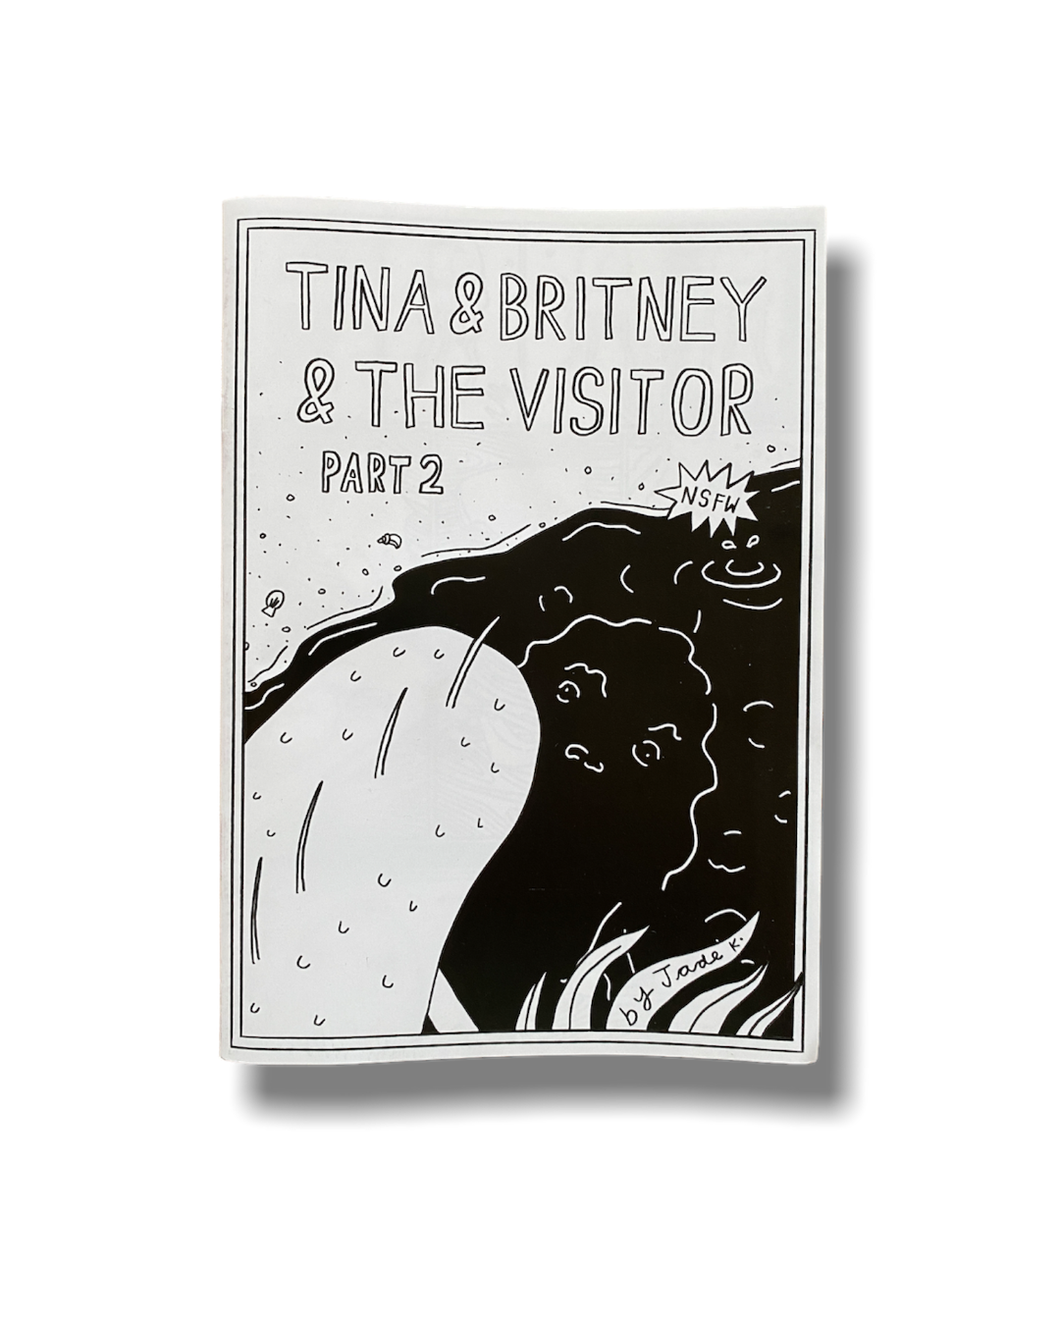 Tina & Britney & The Visitor (Part 2)